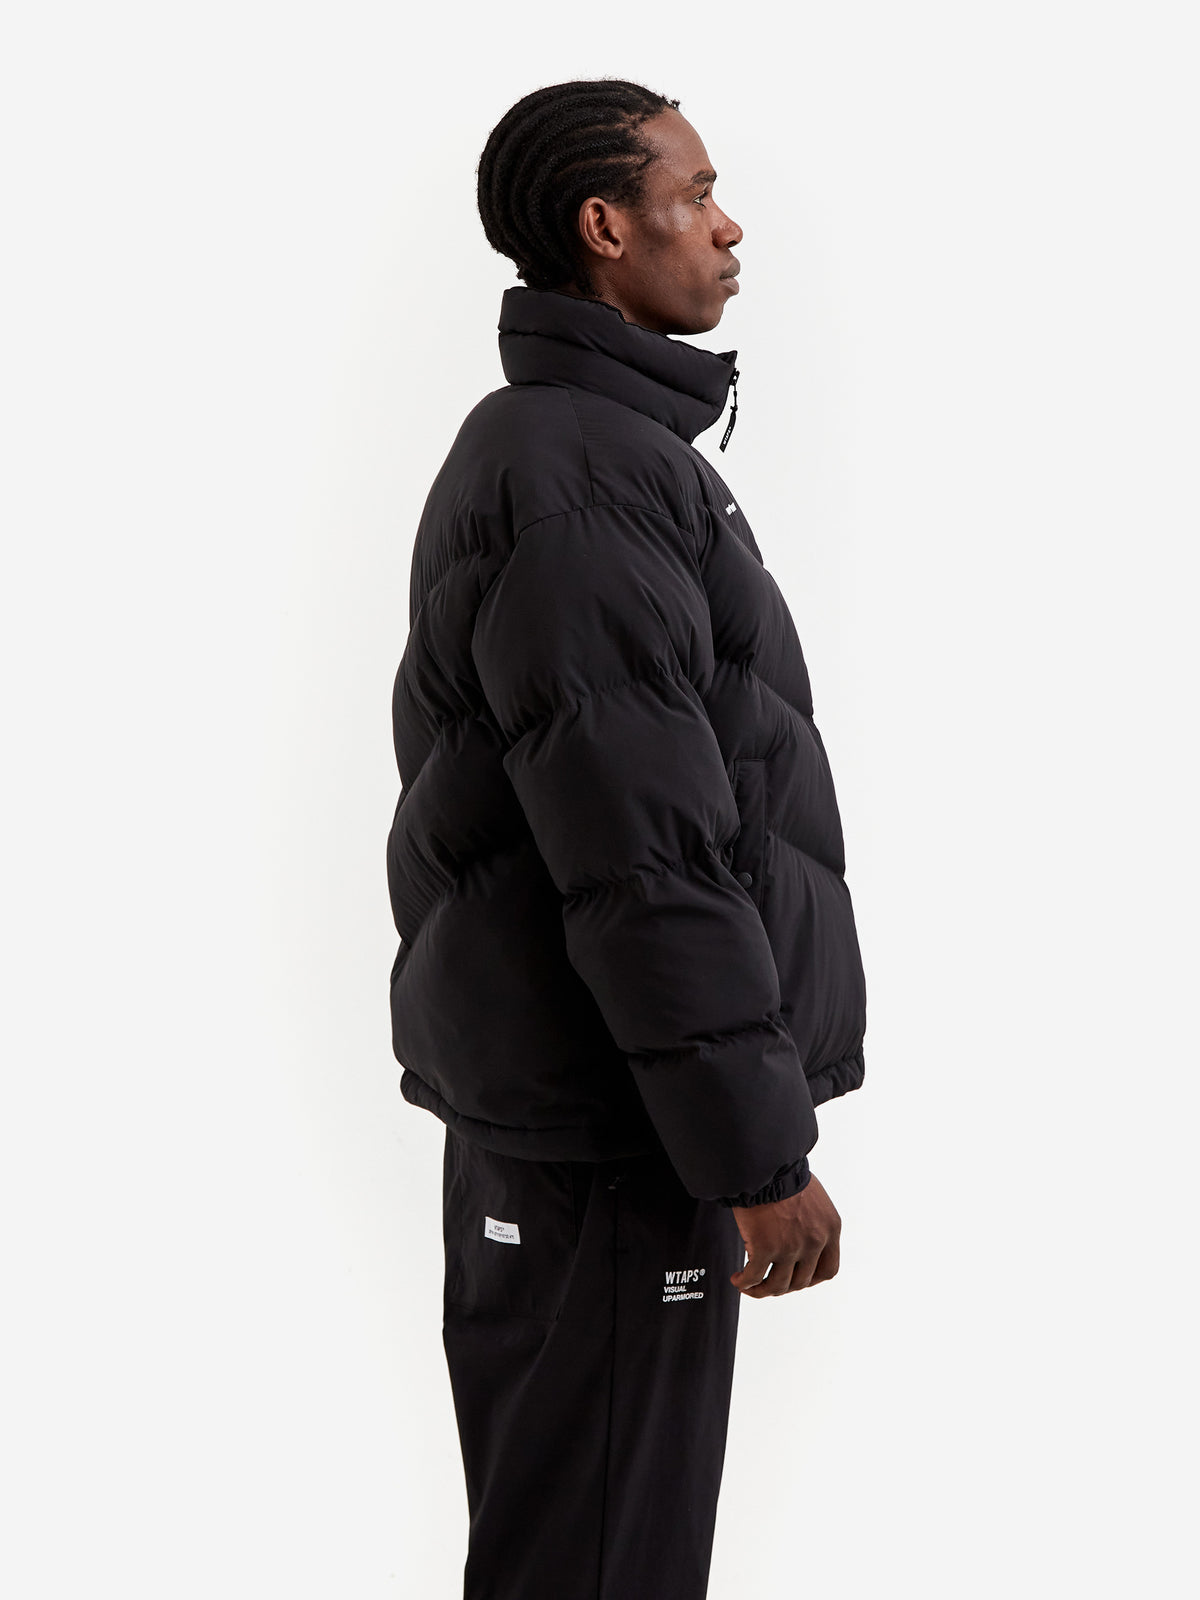 Shop online for the latest WTAPS TTL / Jacket / Poly. Taffeta